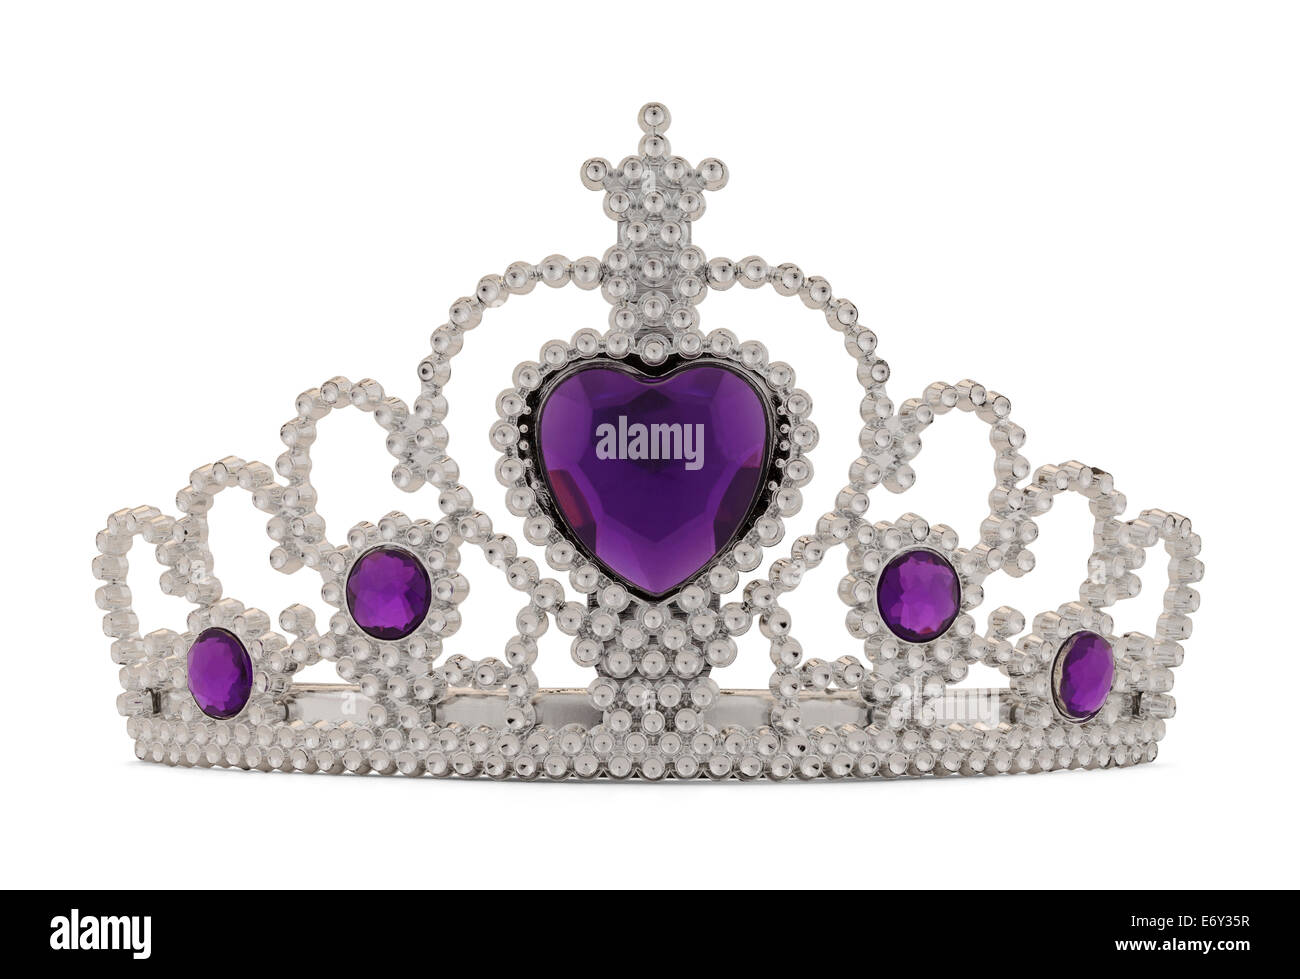 Girls Silver Tiara Crown with Purple Heart Isolated on White Background. Stock Photo